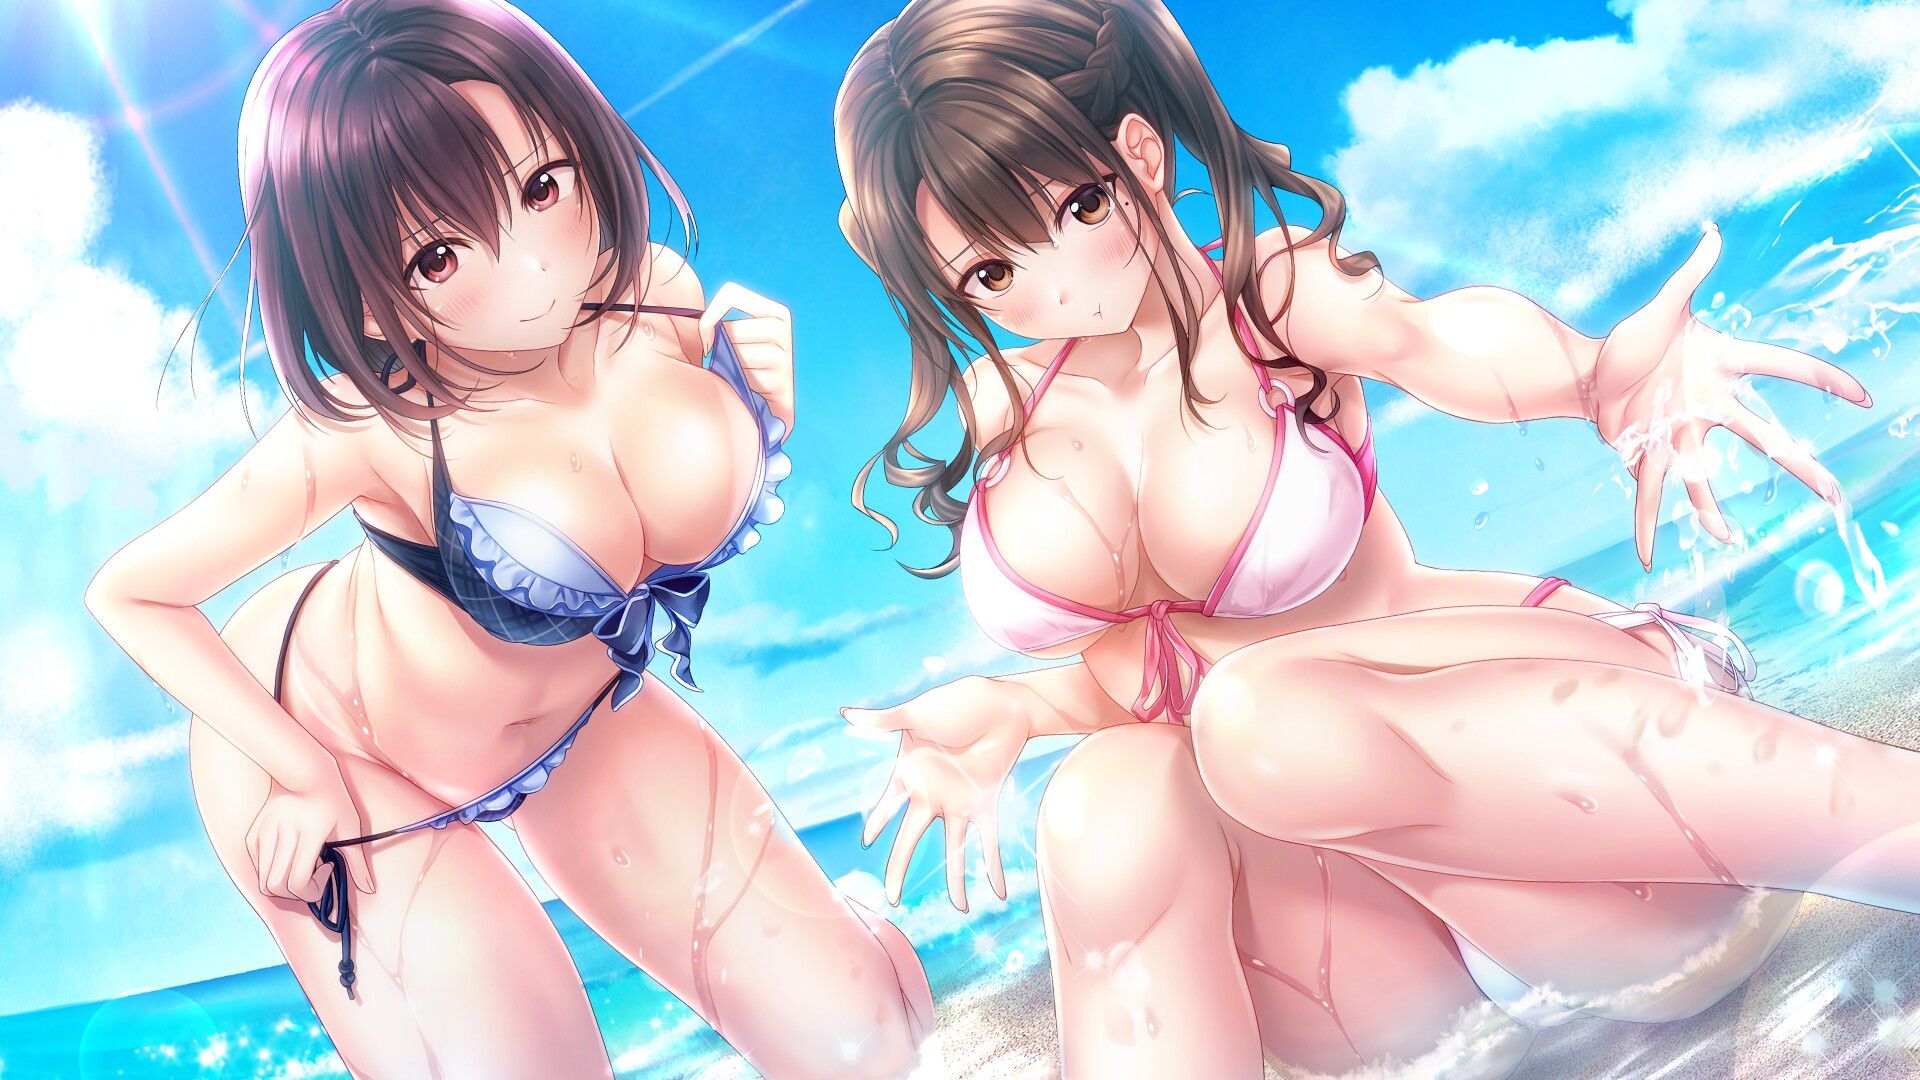 PS4 / Switch version "Aikiss 3 cute" Erotic event CG of boob whiplash swimsuit newly released! 10